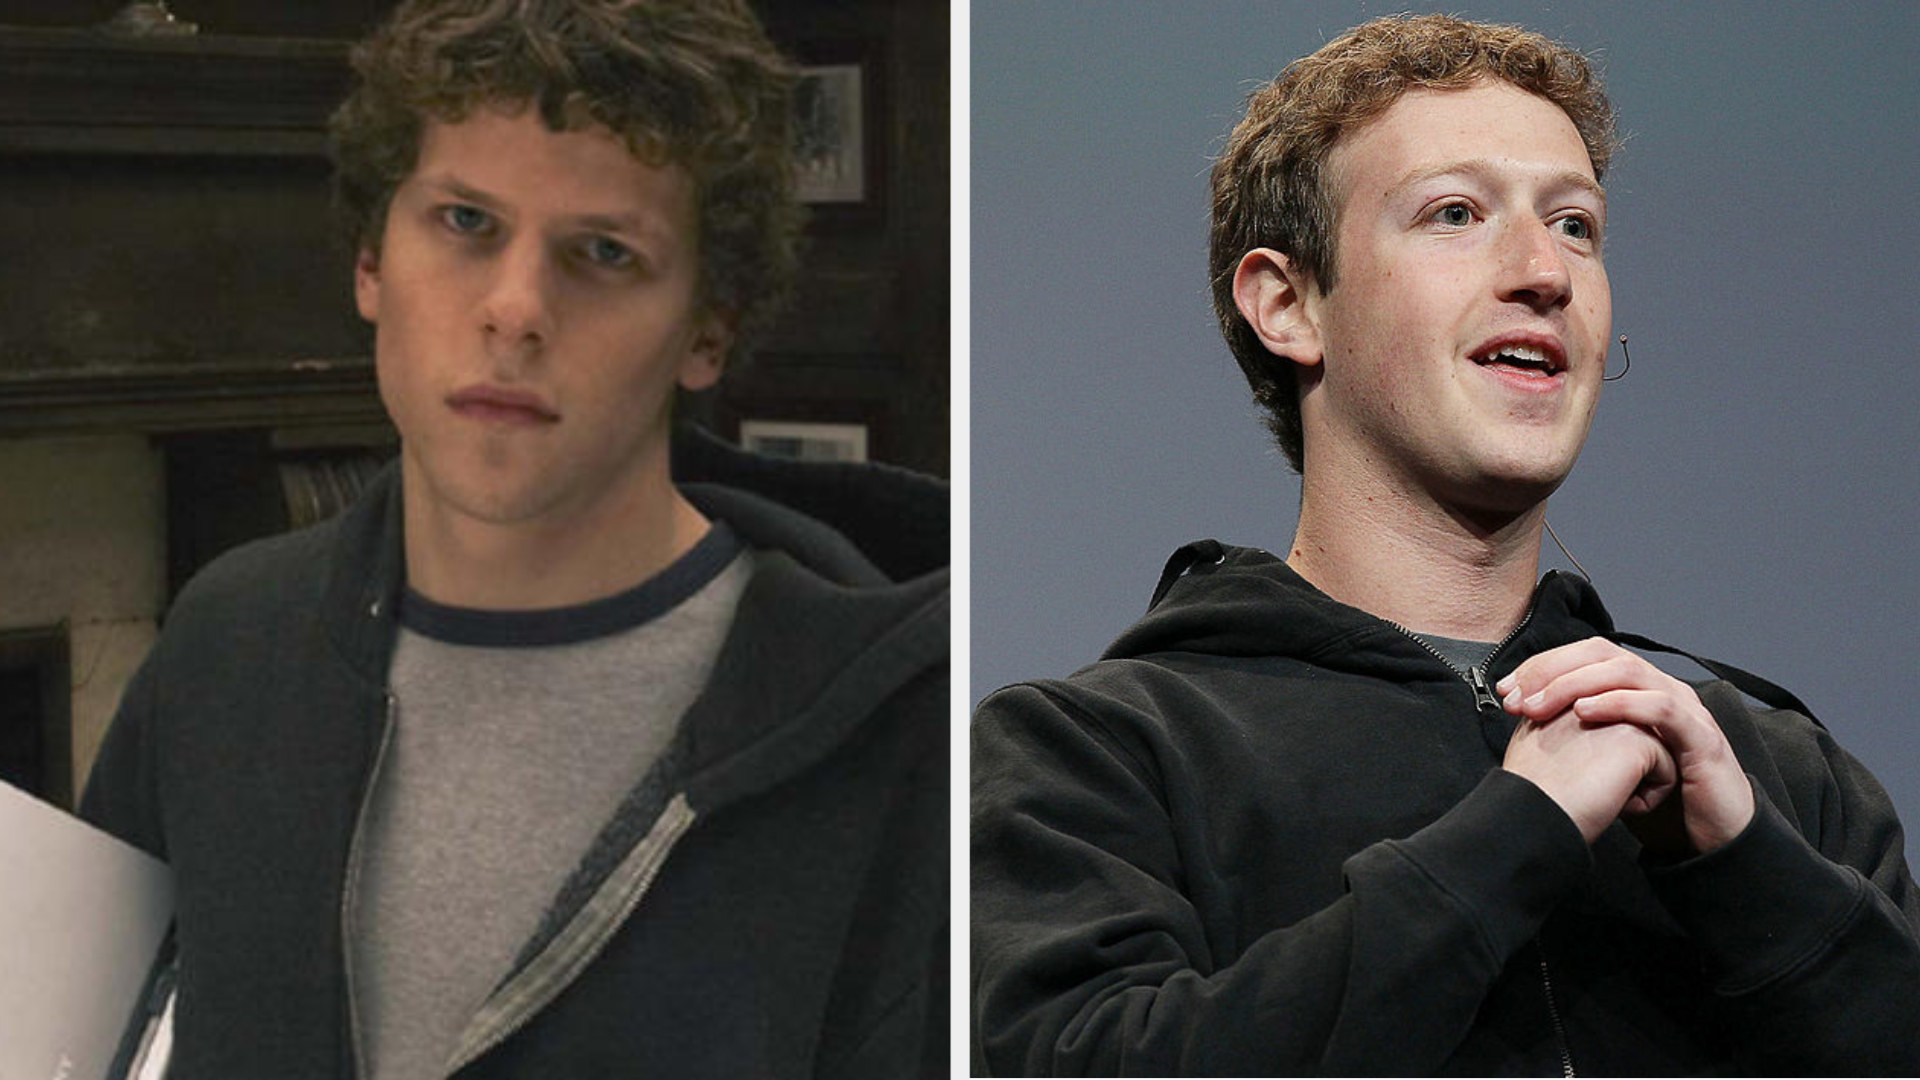 Jesse Eisenberg as Mark Zuckerberg, wearing a casual hoodie and a serious expression on his face; Mark Zuckerberg giving a speech in the early 2010s about Facebook, wearing a casual hoodie and holding his hands together